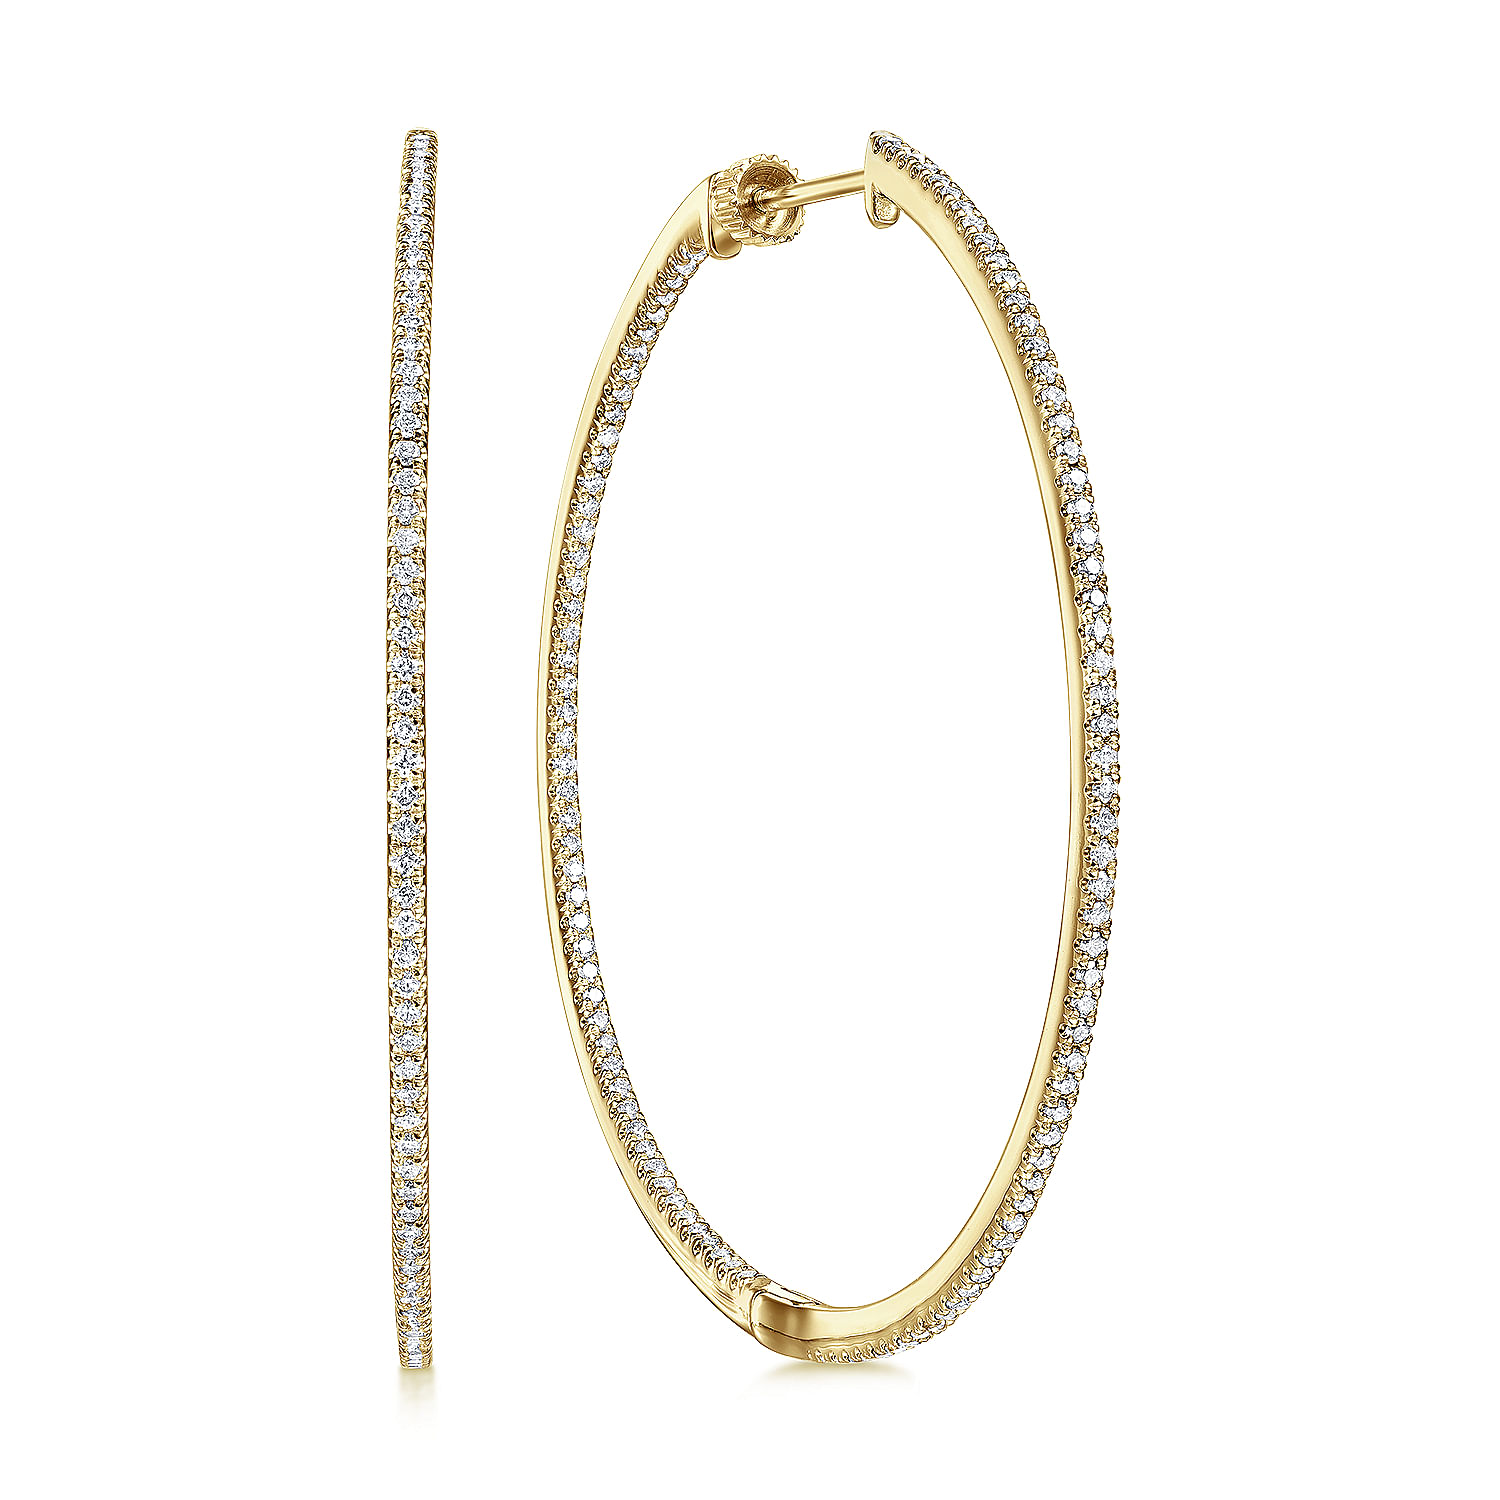 14K Yellow Gold French Pave 50mm Round Inside Out Diamond Classic Hoop Earrings